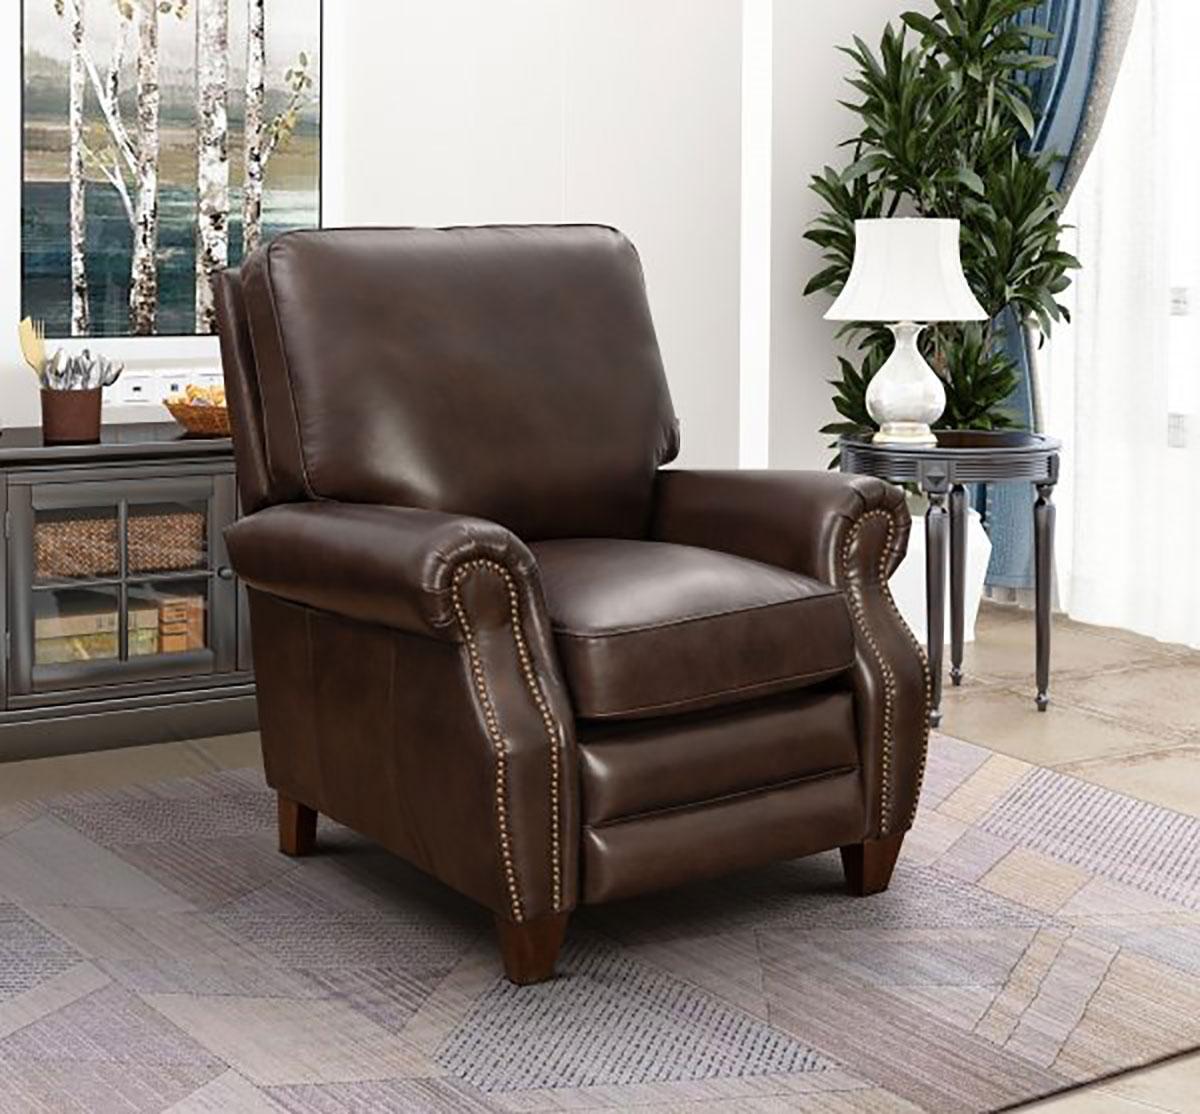 Barcalounger Briarwood Recliner Chair - Double Fudge/All Leather